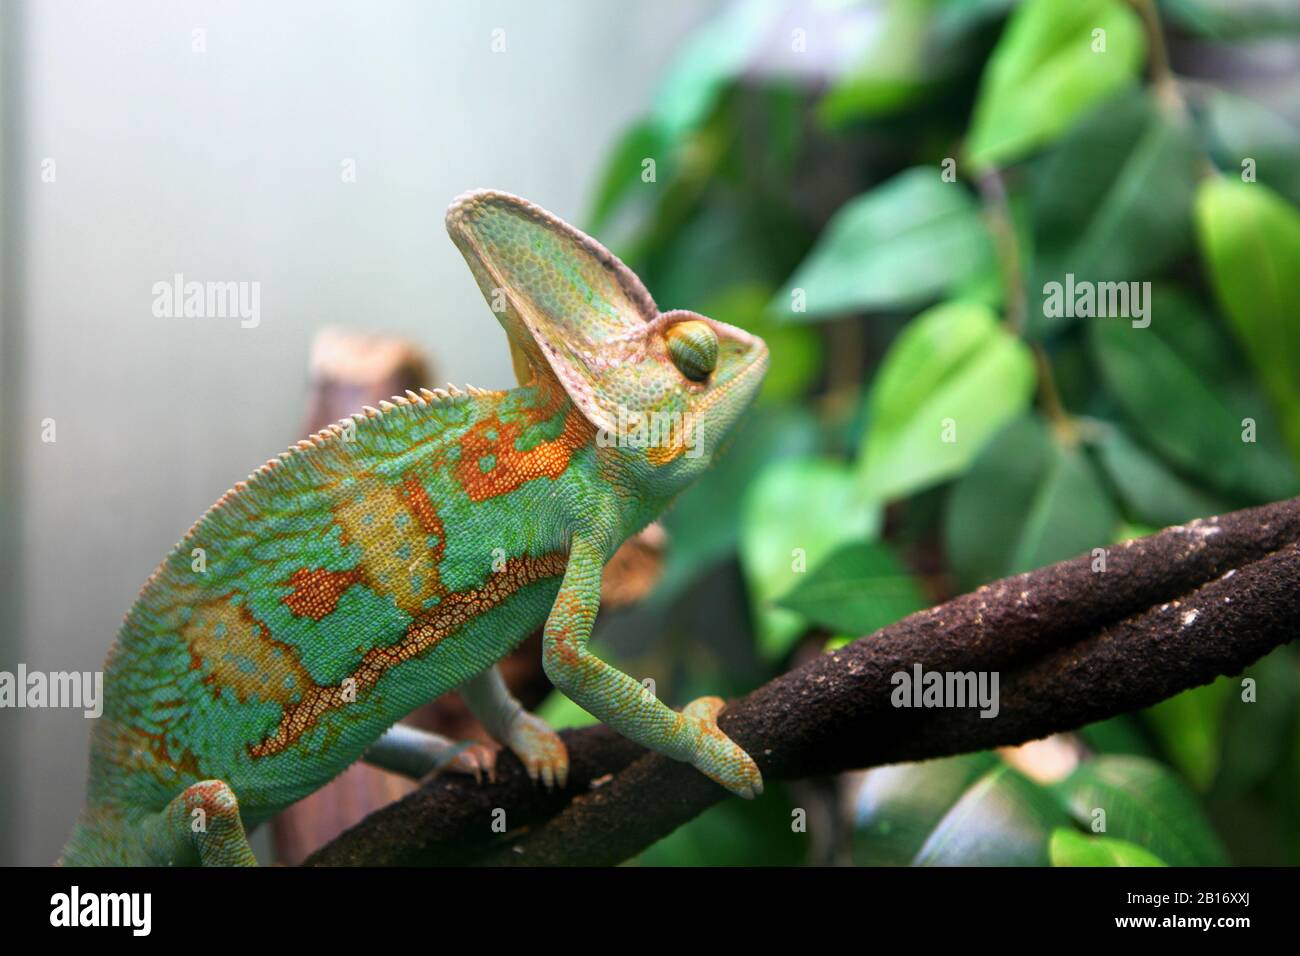 green colorful chameleon sitting on the branch - wild animal close up view. Stock Photo